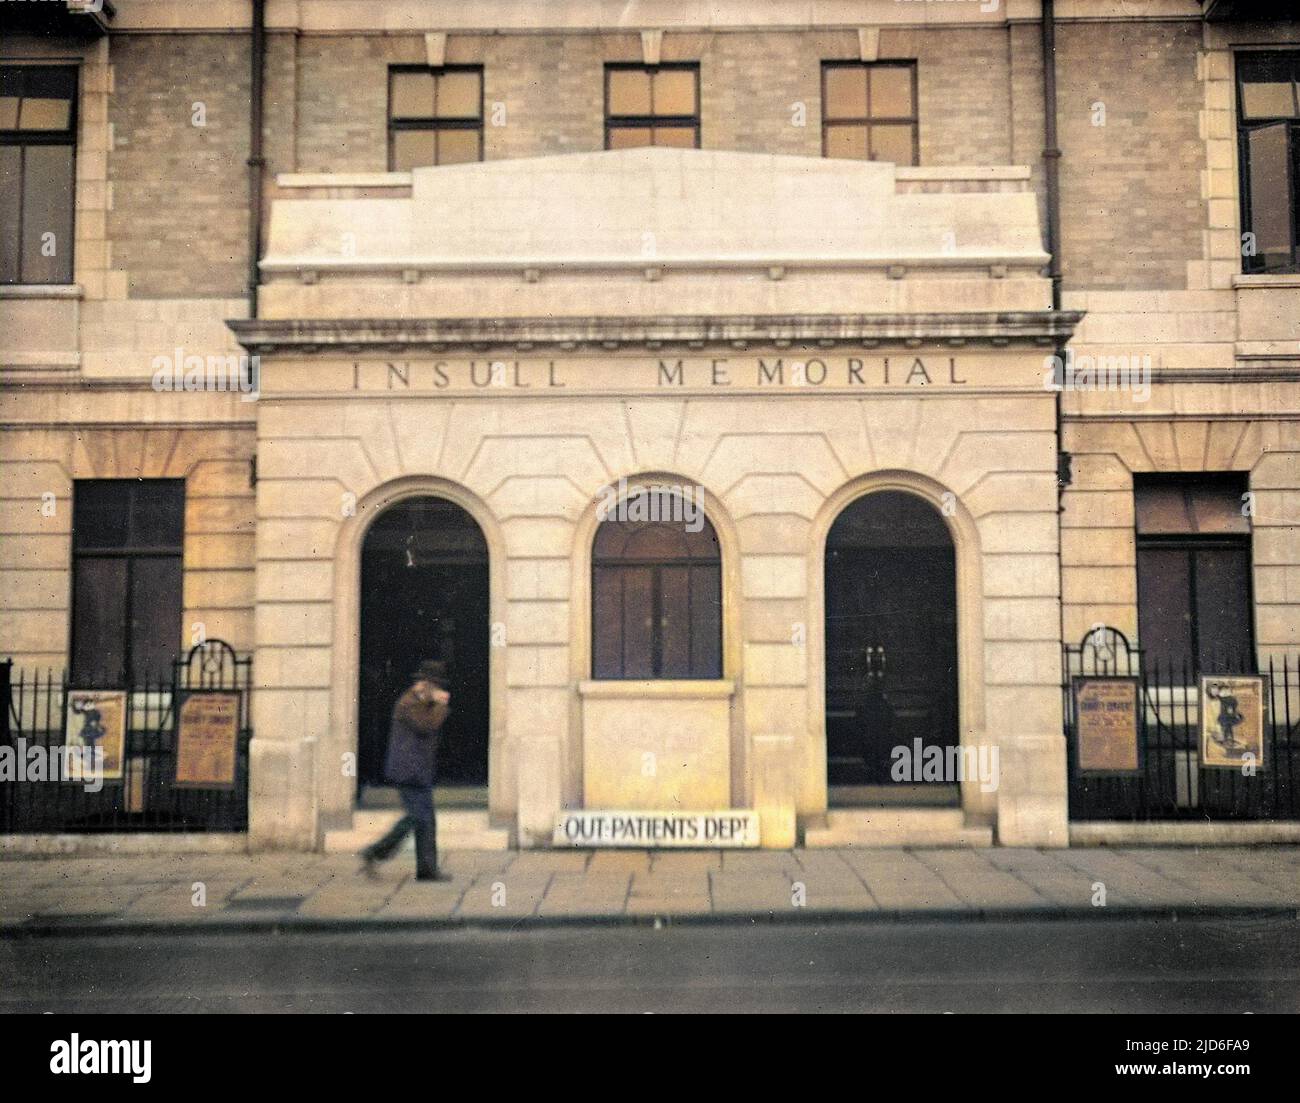 One of the Samuel Insull Memorial refuge houses. A London born American public untilities financier, Insull (1859 - 1938) donated land for British old peoples homes. Colourised version of : 10164174       Date: early 1930s Stock Photo